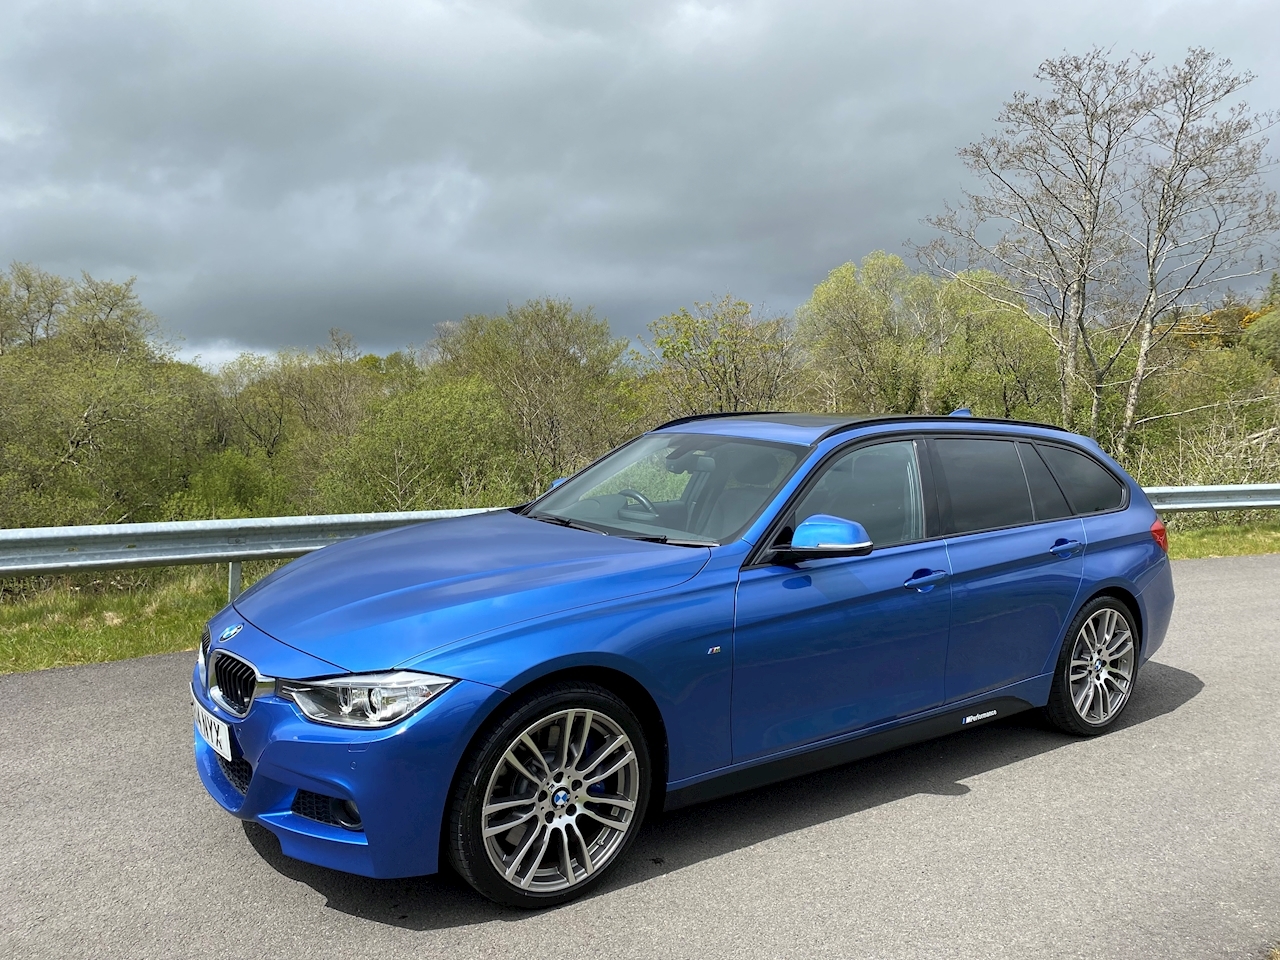 3 Series 335d xDrive M Sport Touring Touring 3.0 Automatic Diesel